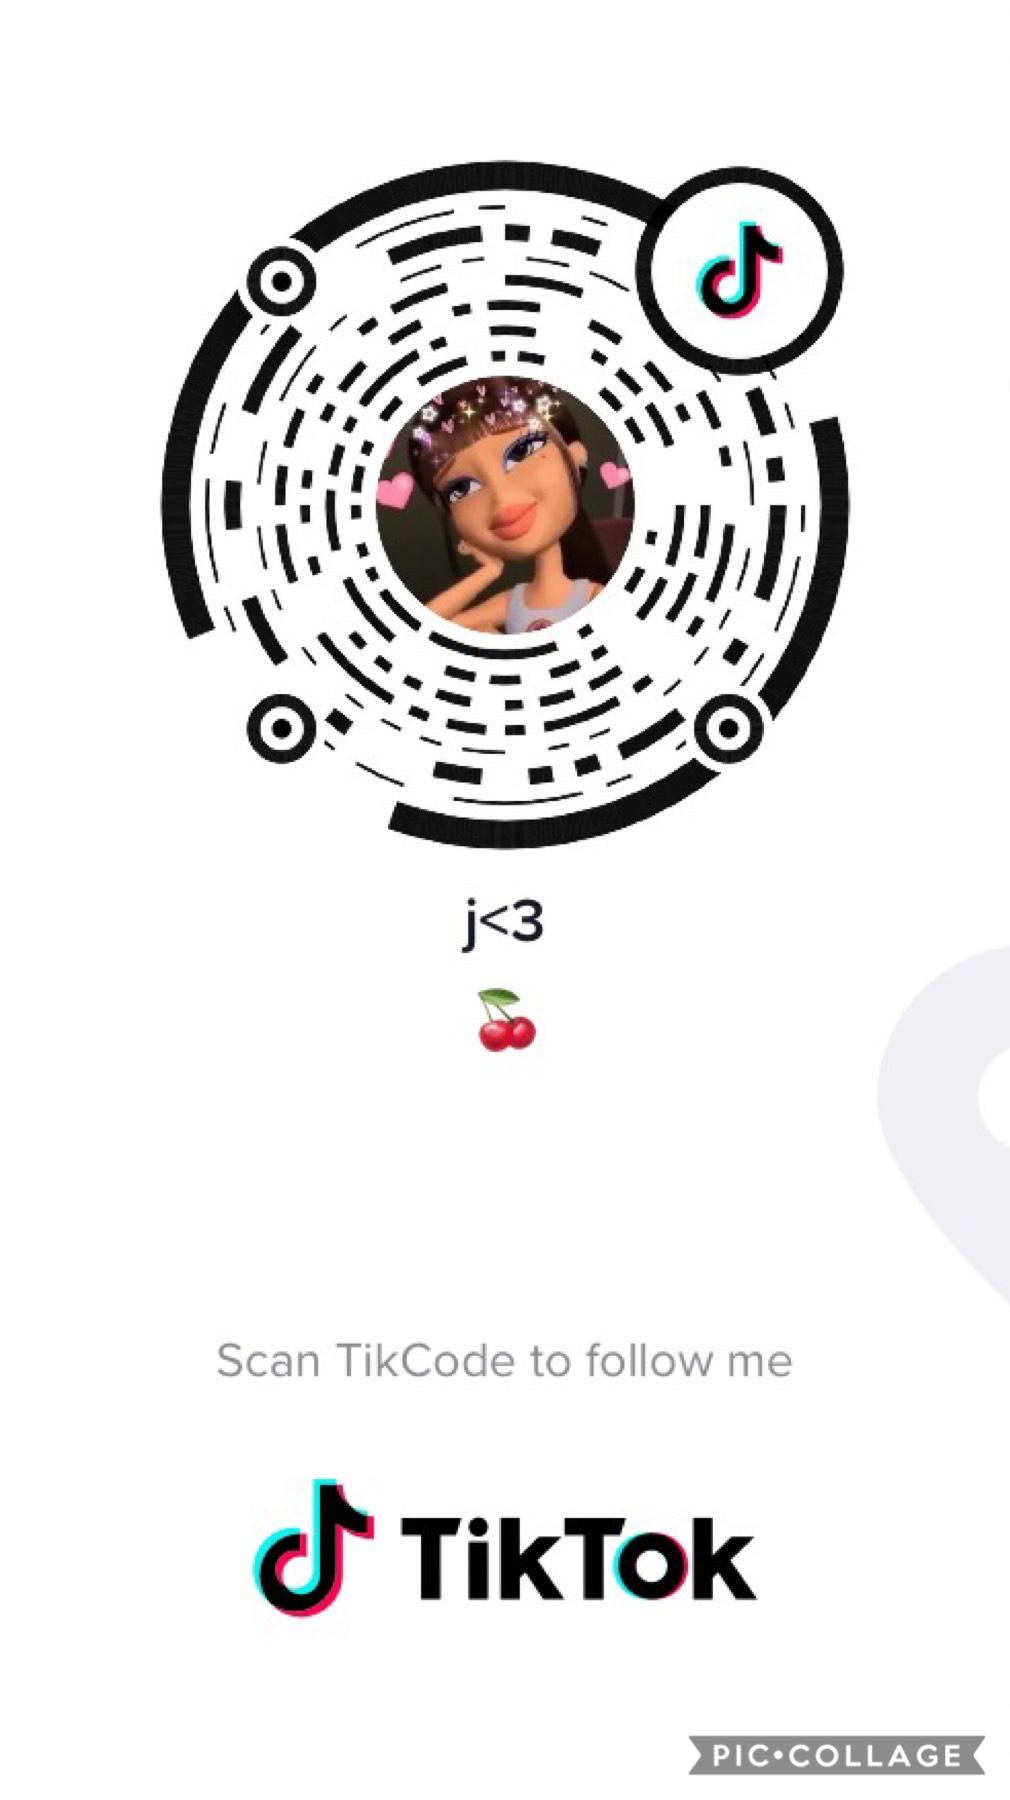 go ahead and follow my new TikTok account @jade.dior

- add back
- gonna be a competition soon